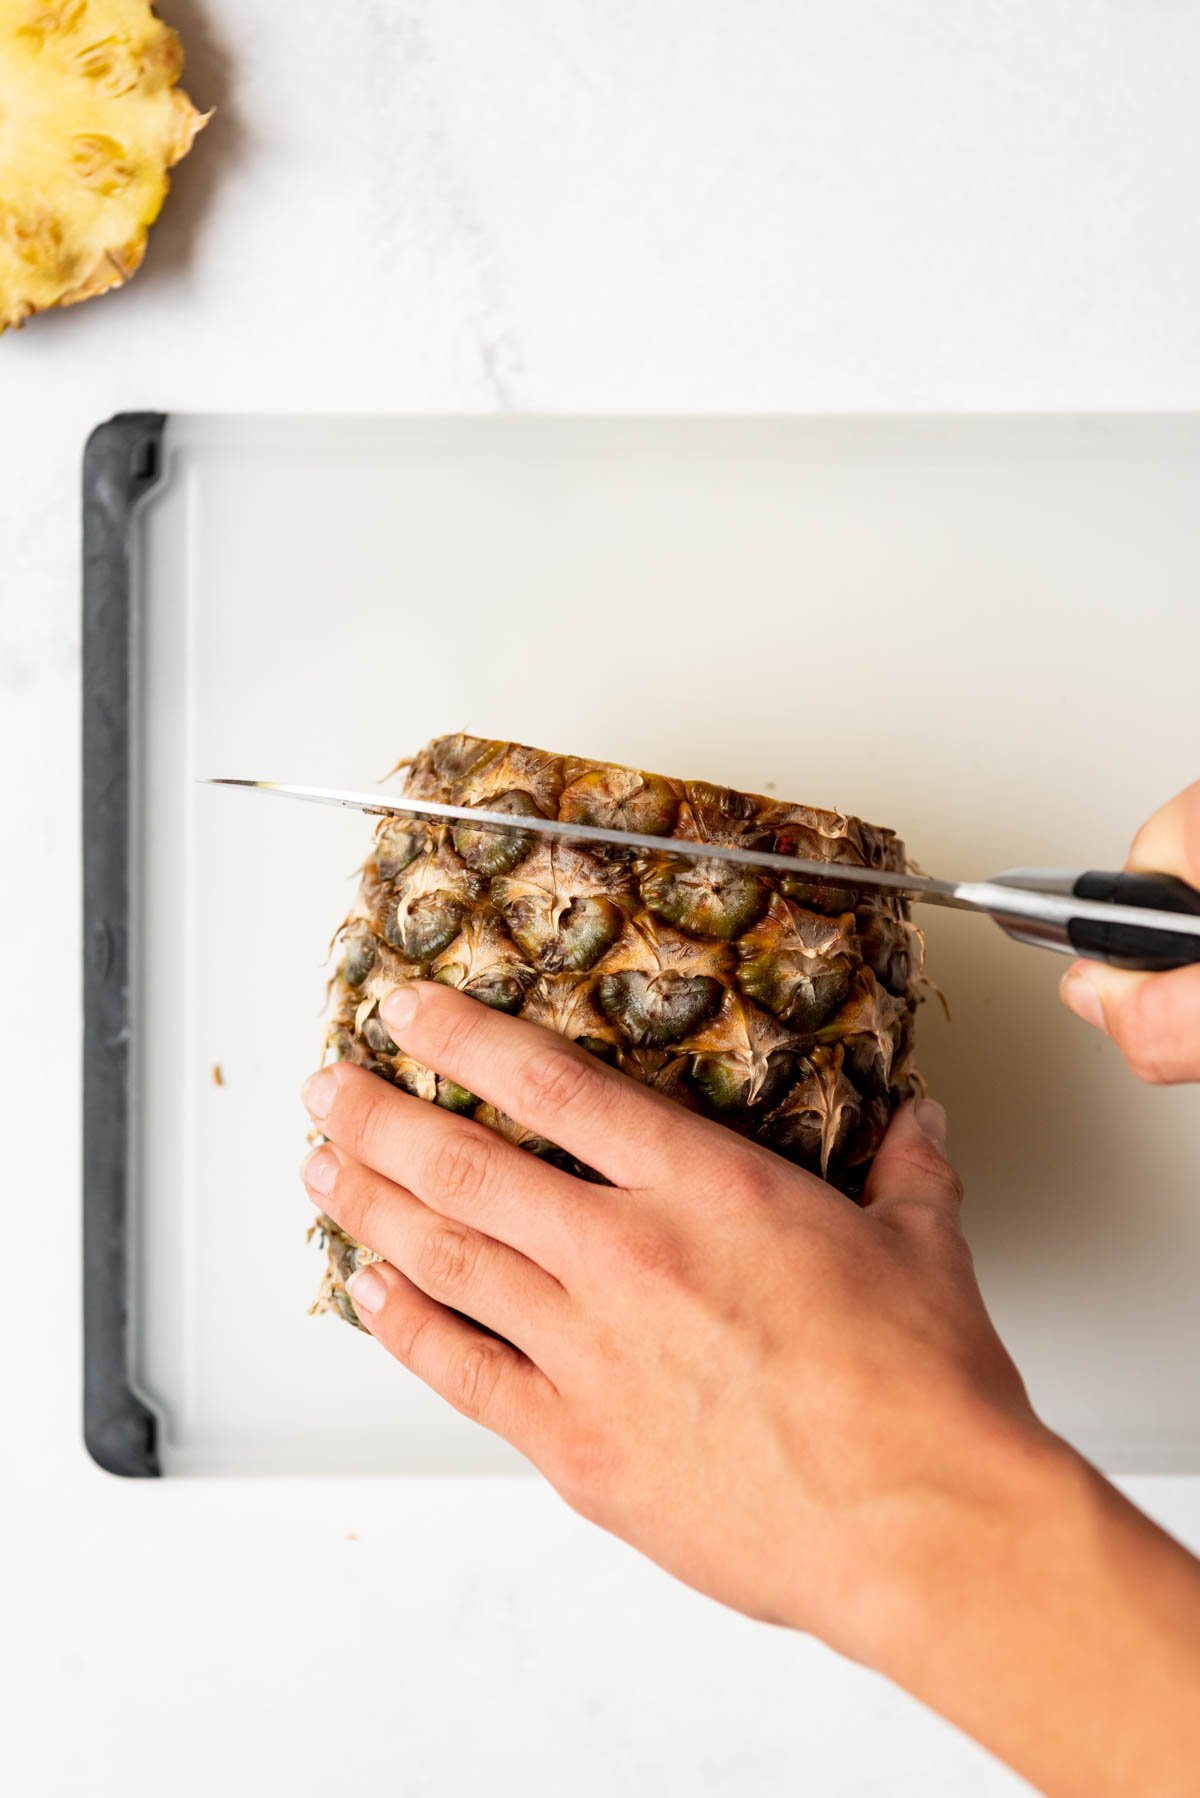 Hands holding a knife to slice a fresh pineapple on a cutting board.